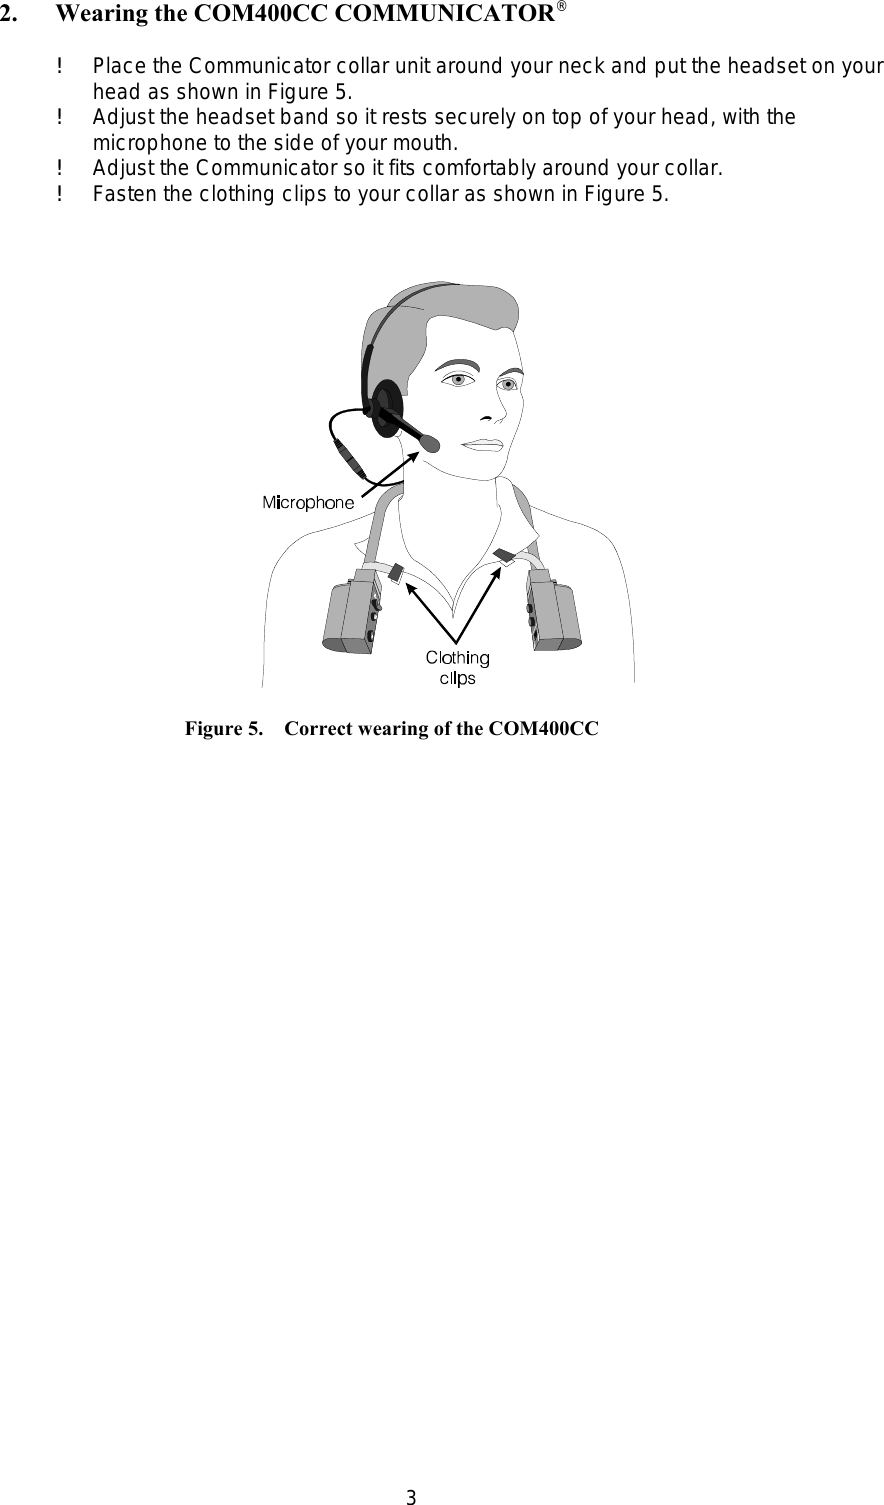 3    Figure 5.    Correct wearing of the COM400CC2. Wearing the COM400CC COMMUNICATOR  ®!Place the Communicator collar unit around your neck and put the headset on yourhead as shown in Figure 5.!Adjust the headset band so it rests securely on top of your head, with themicrophone to the side of your mouth.!Adjust the Communicator so it fits comfortably around your collar.!Fasten the clothing clips to your collar as shown in Figure 5.